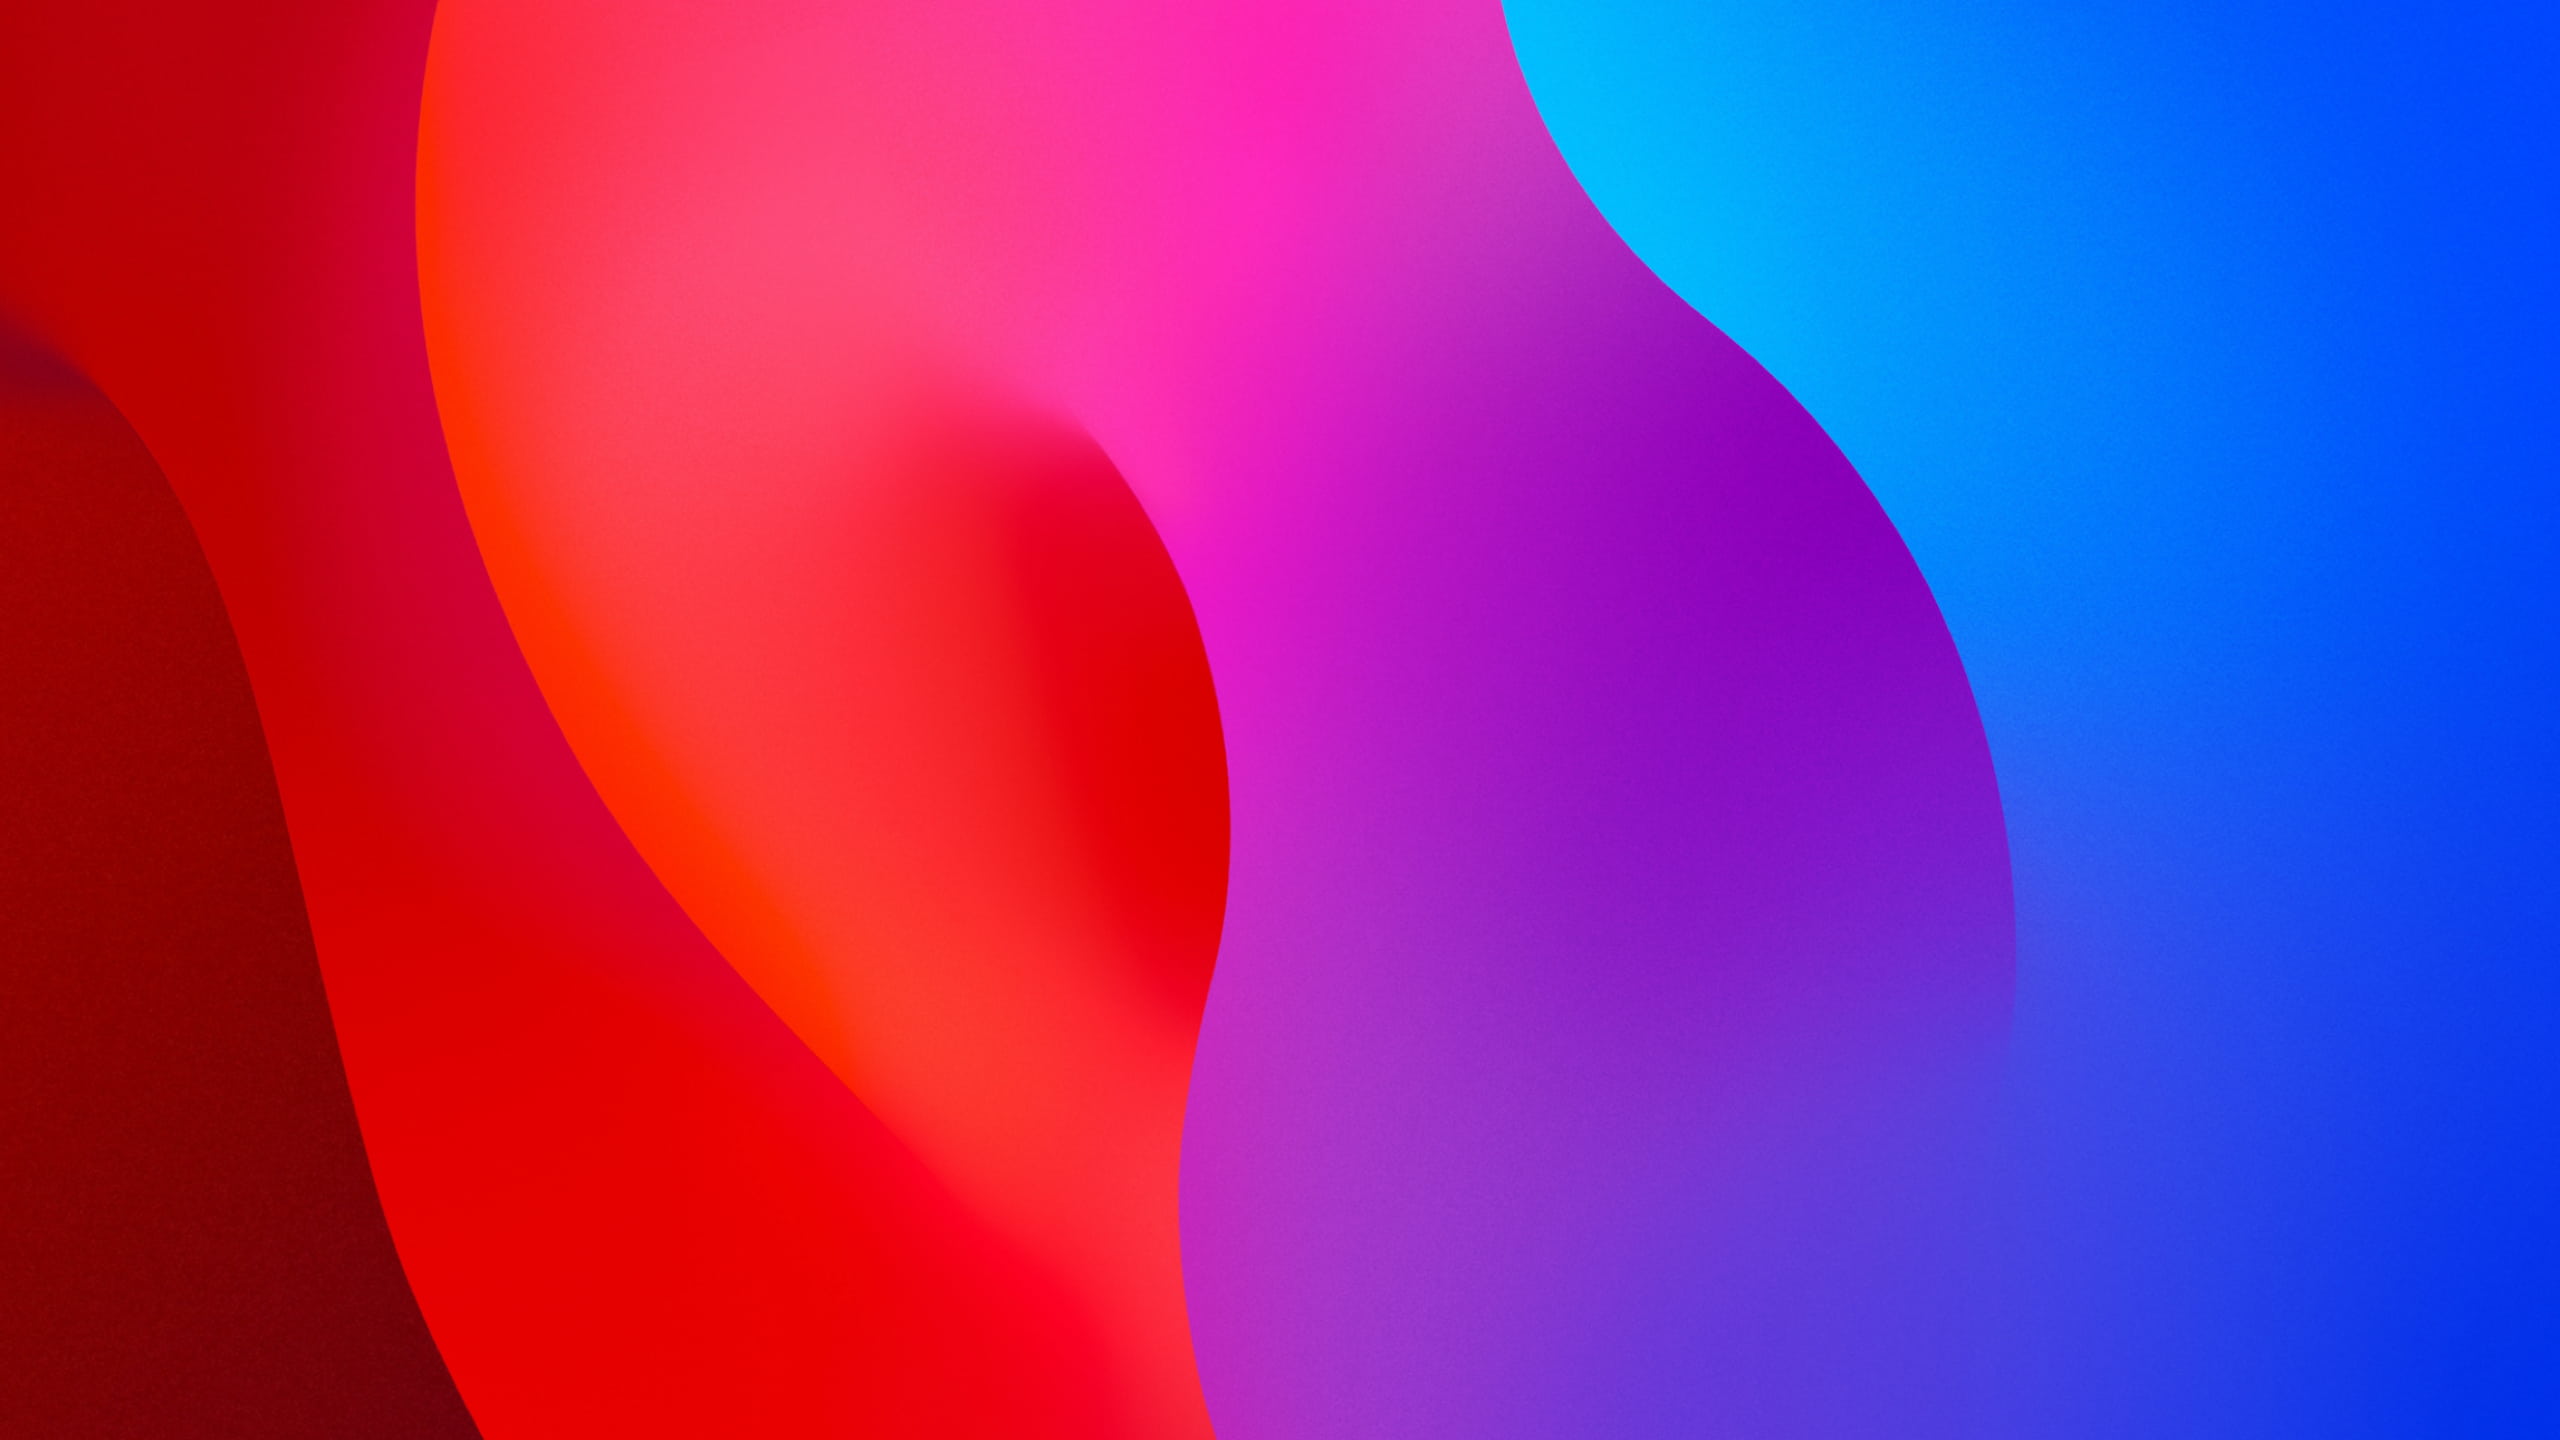 General 2560x1440 red purple background blue background digital art abstract colorful gradient minimalism red background blue simple background